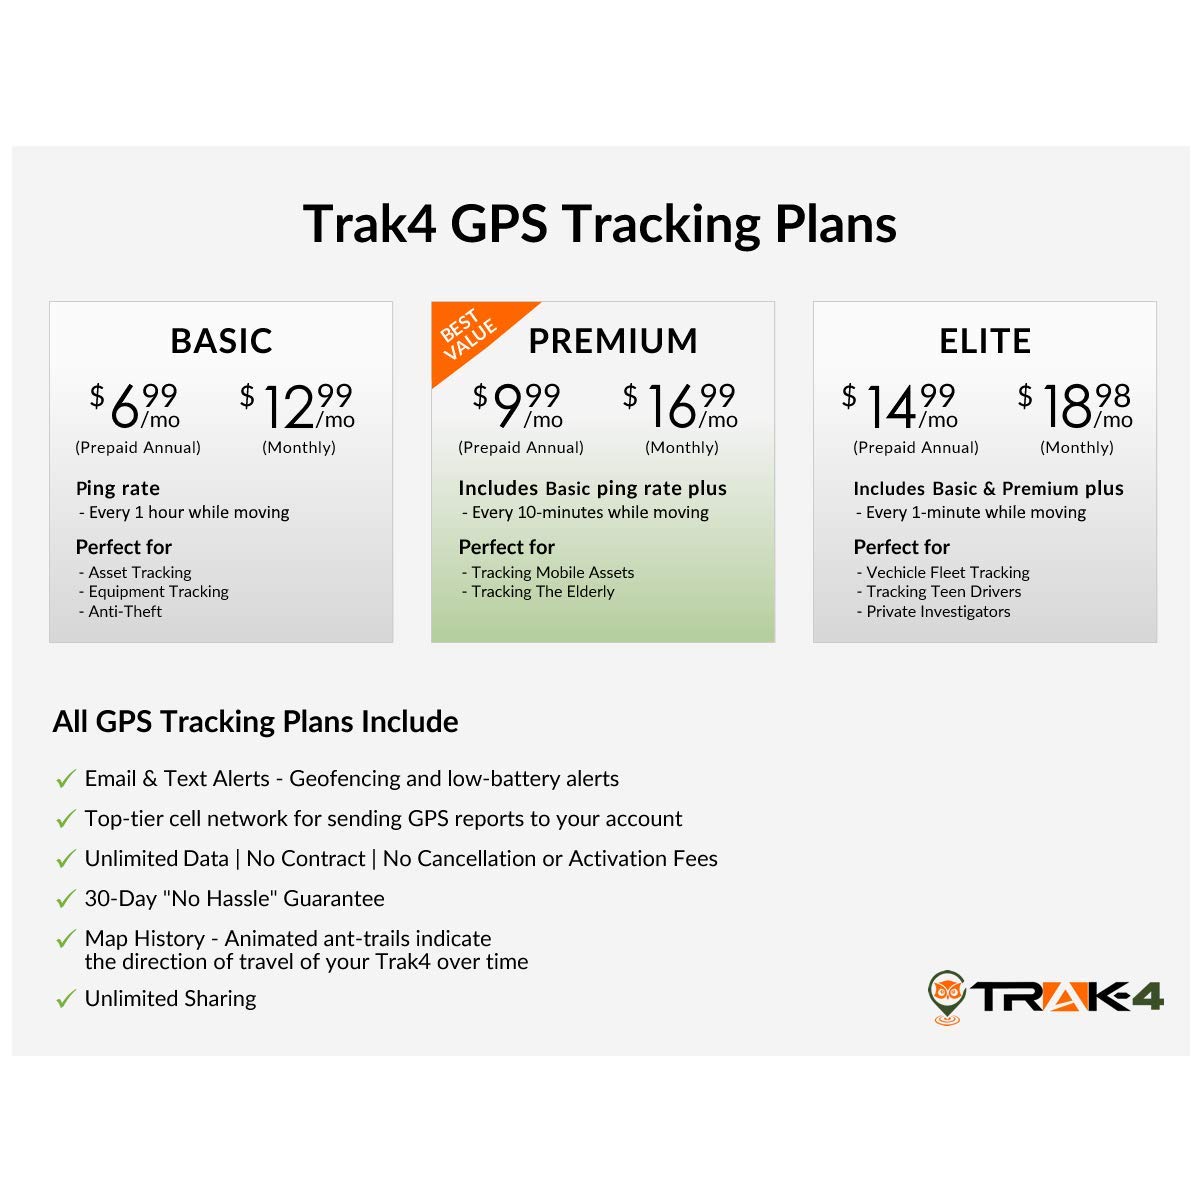 Trak-4 GPS Tracker for Tracking Assets, Equipment, and Vehicles. Email & Text Alerts. Subscription Required.